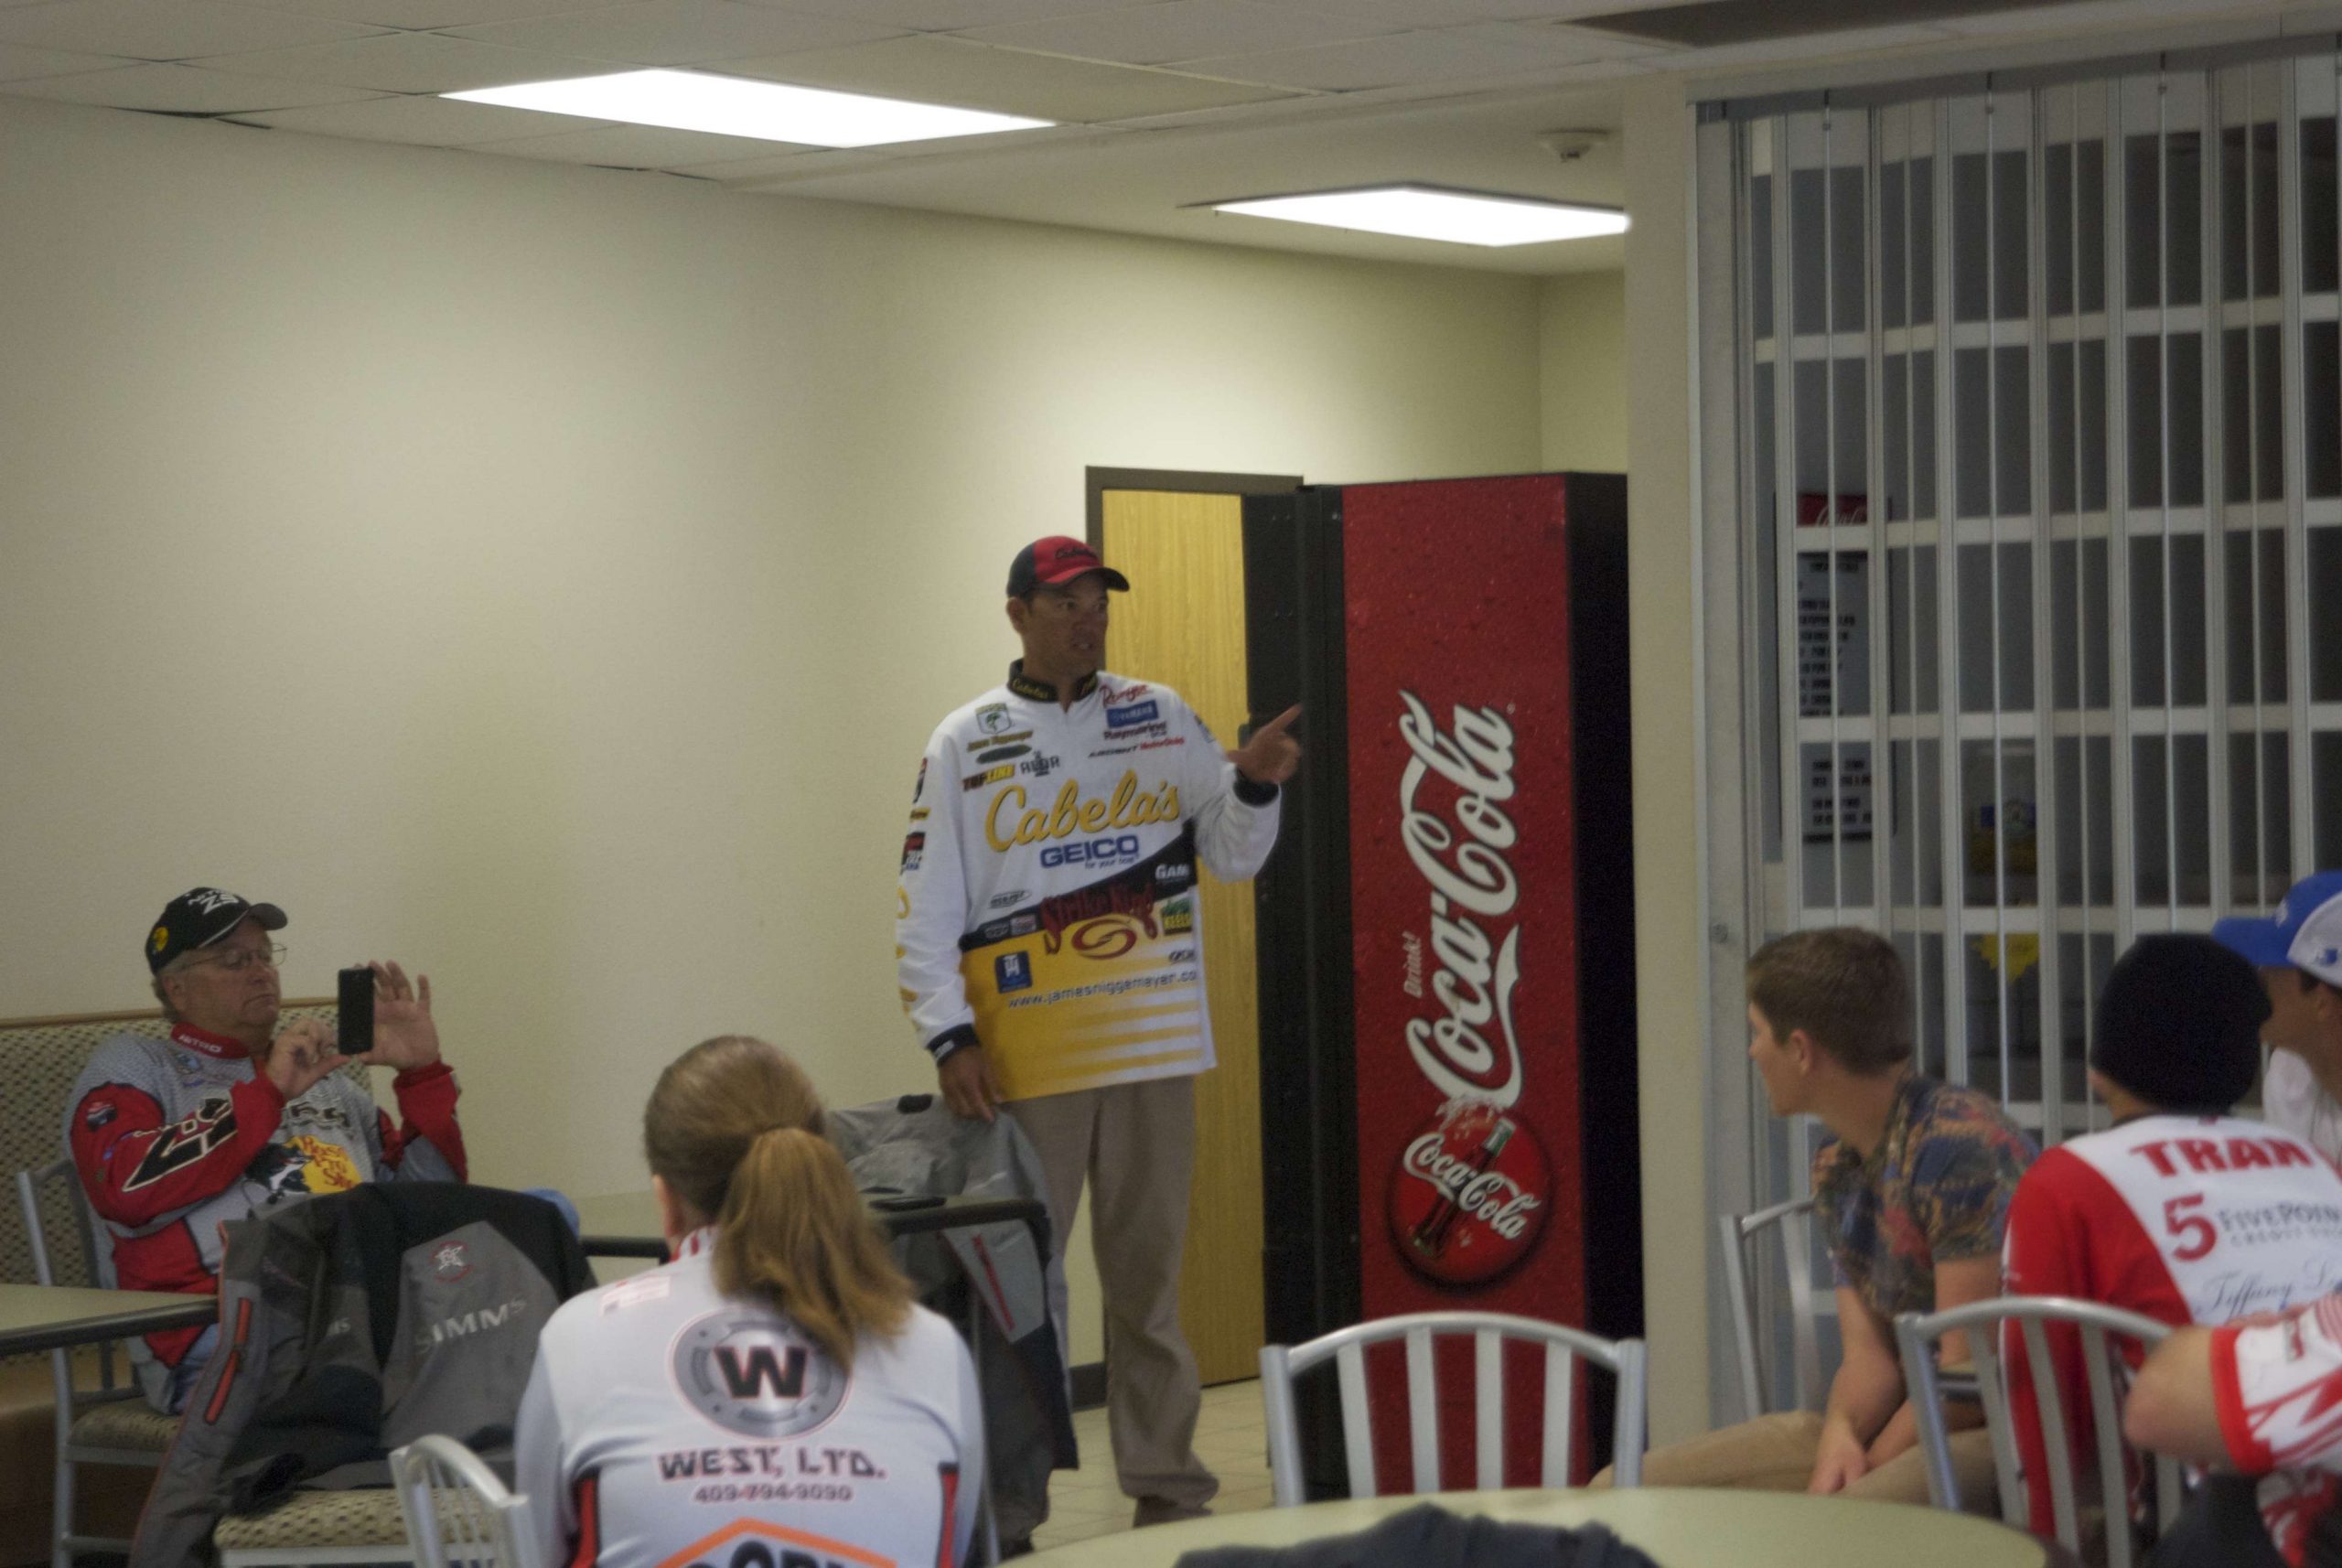 High School students were brought together by Gopher Industrial to spend time learning from and fishing with Elite Series pros as part of the Bassmaster High School Elite Experience presented by Costa. Here, James Niggemeyer speaks with a group of young anglers.